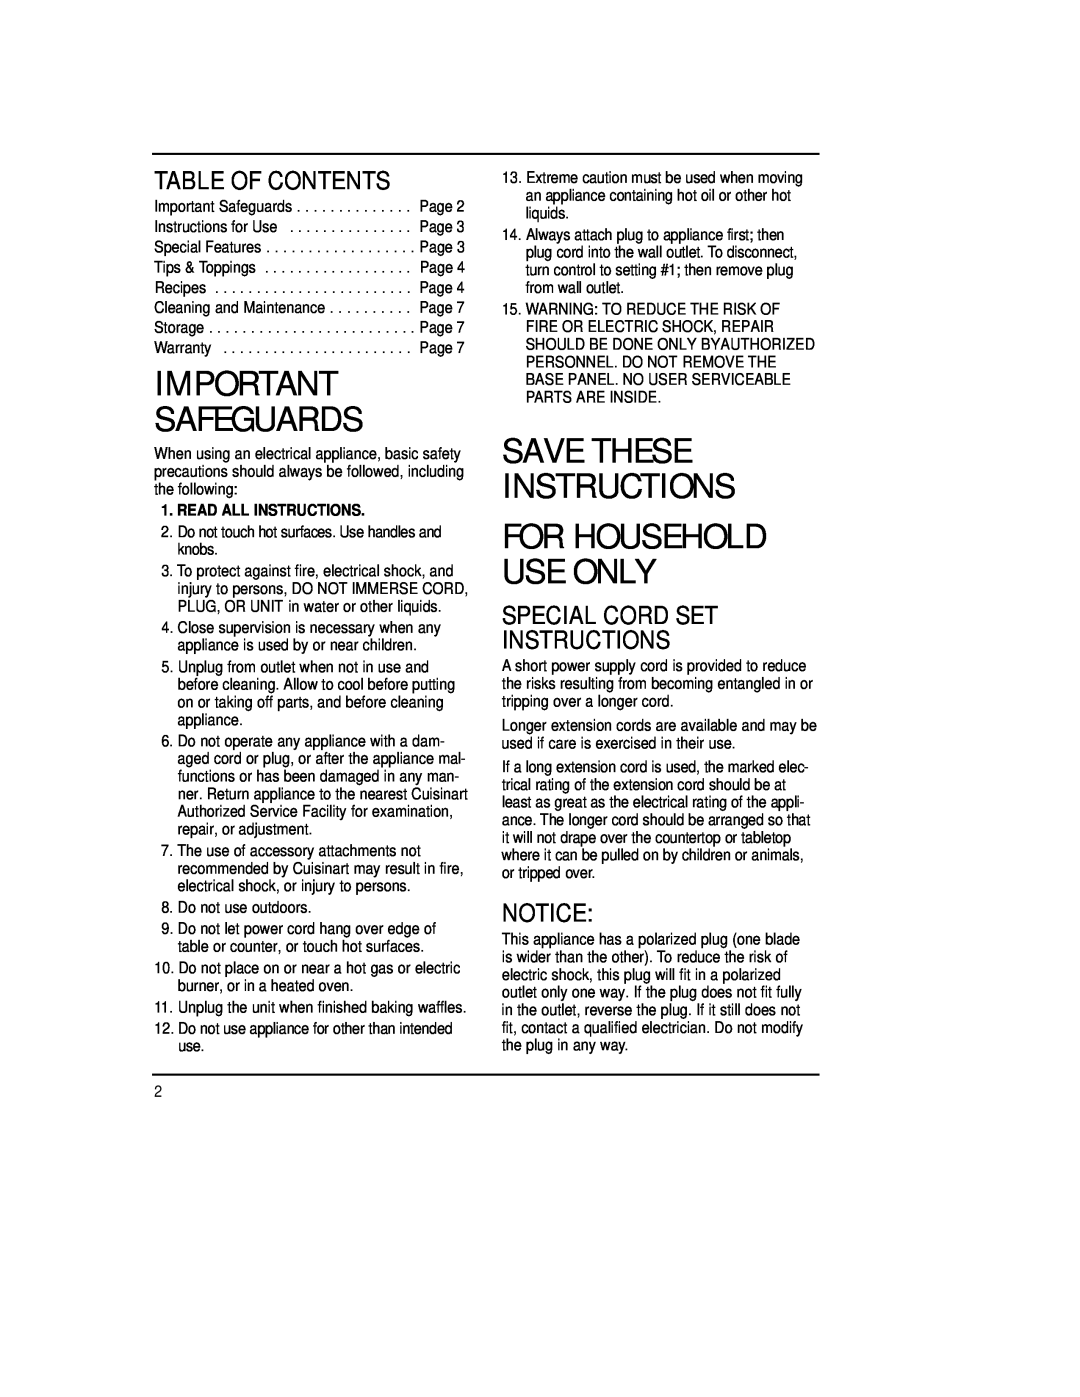 Cuisinart WMB-4AC manual Table Of Contents, Special Cord Set Instructions, Safeguards, Save These Instructions 